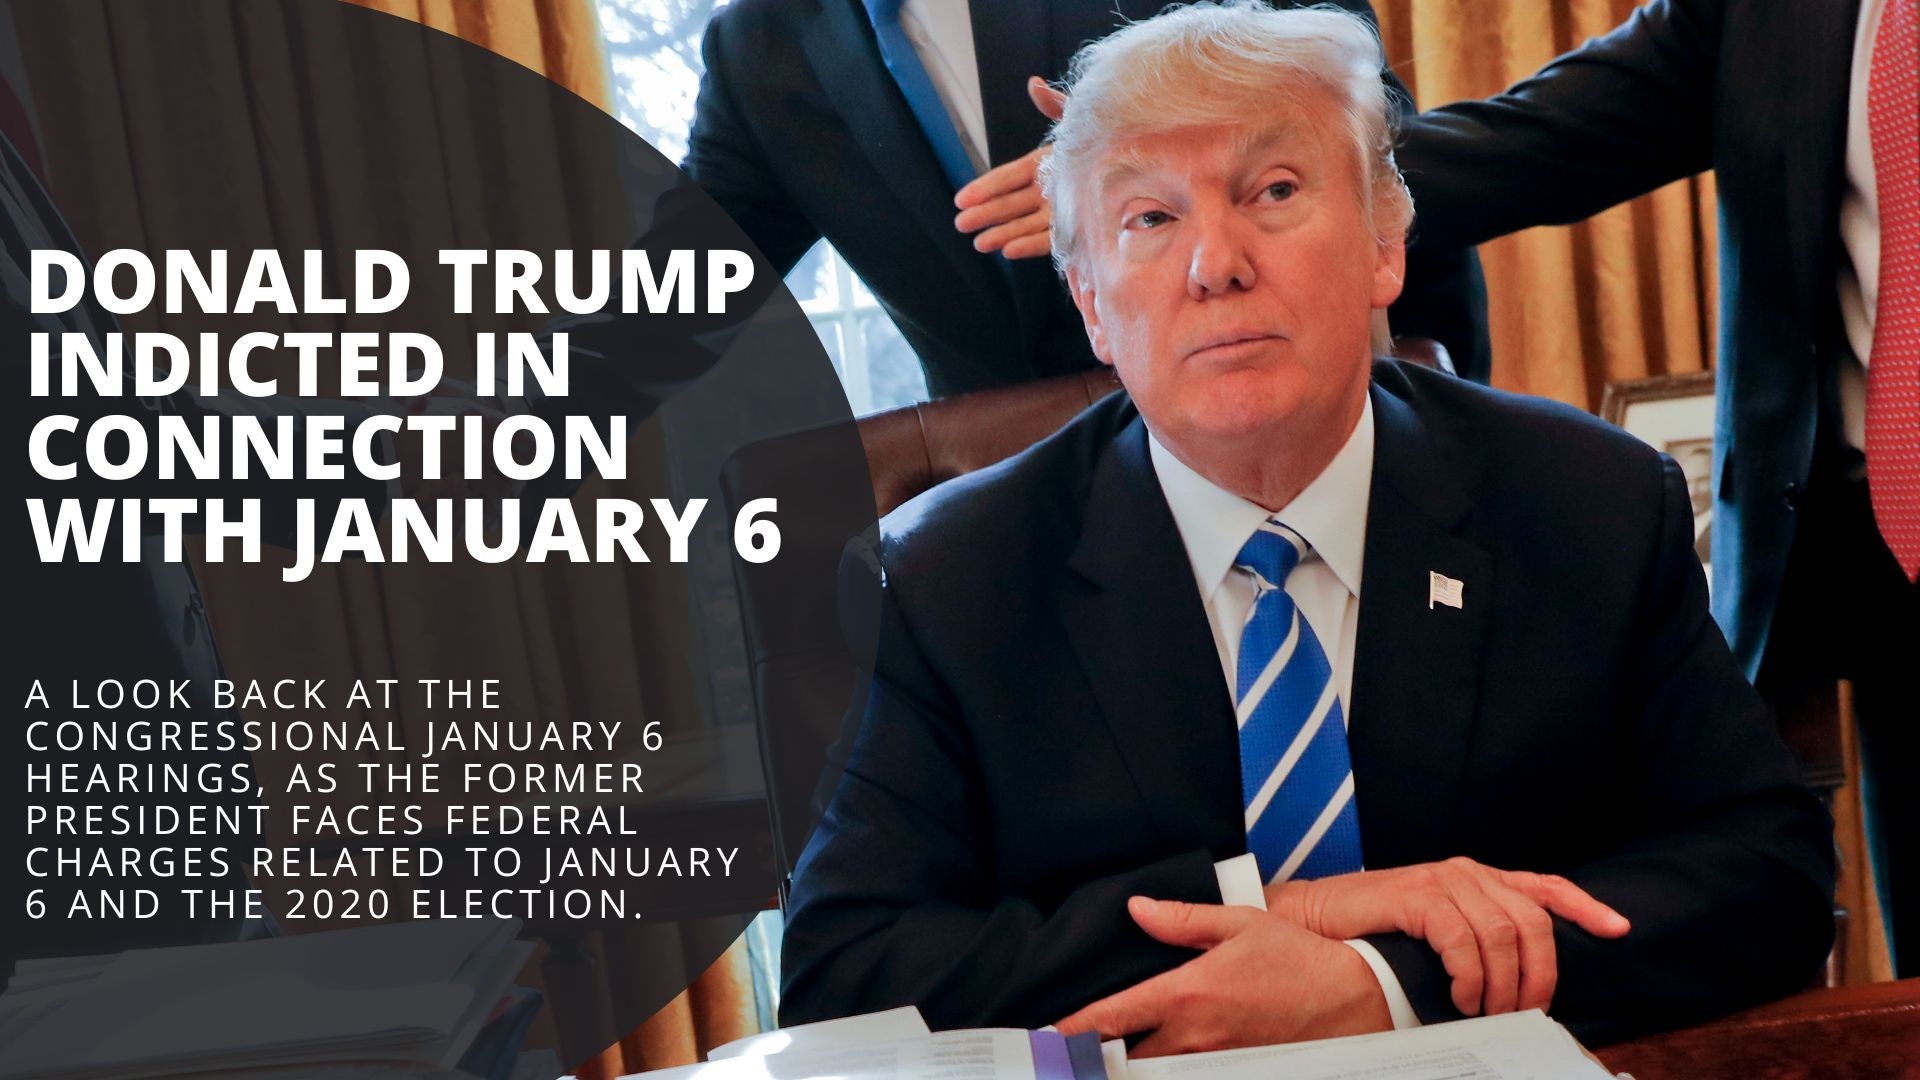 Former President Donald J Trump is indicted on charges related to the January 6 probe. We look back at the congressional hearings on January 6.